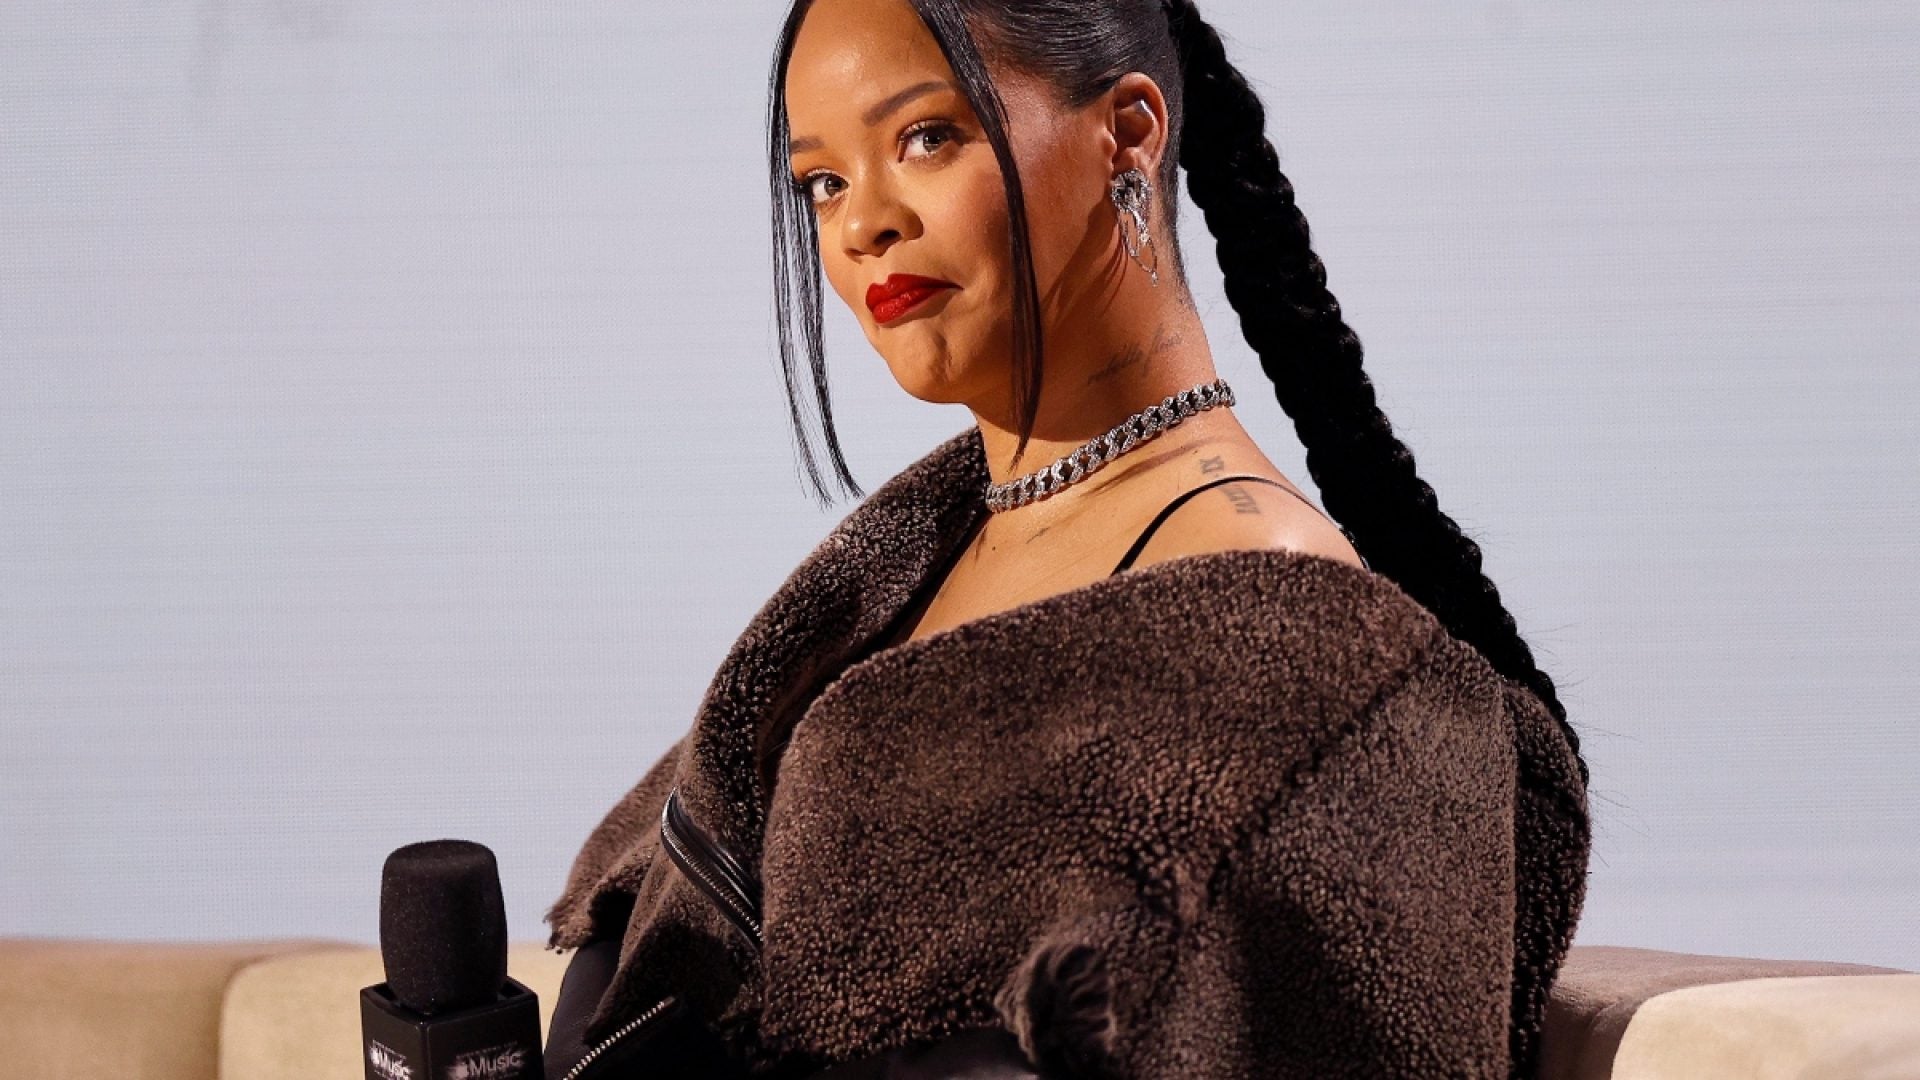 WATCH: These Are The Celebrity Predictions For Rihanna Bowl